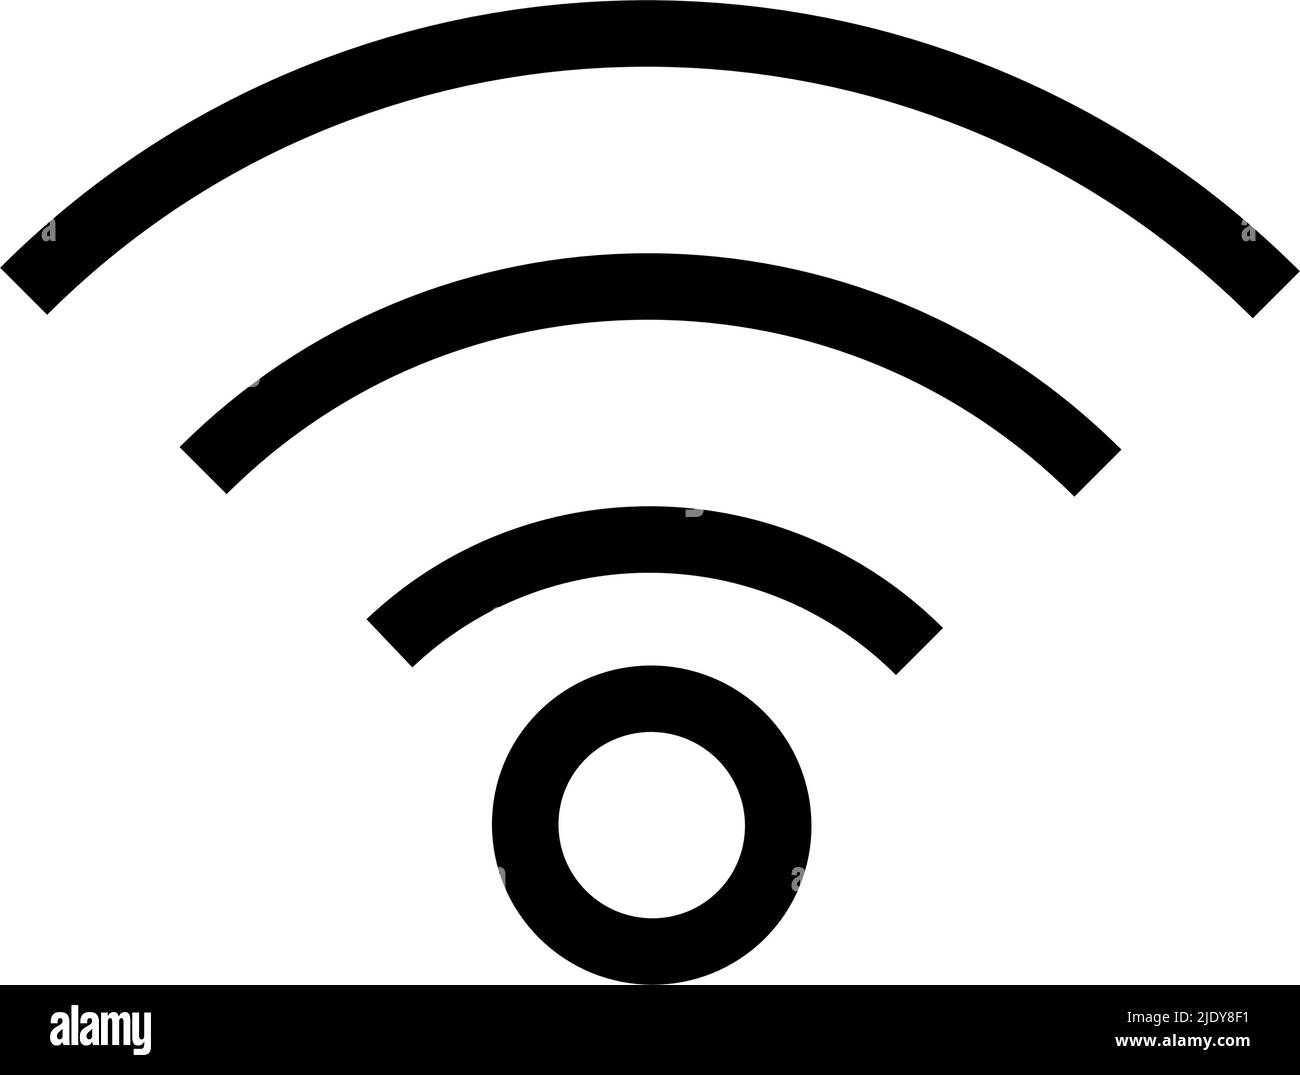 Simple symbol for wifi. Mobile communication or network. Editable vector. Stock Vector